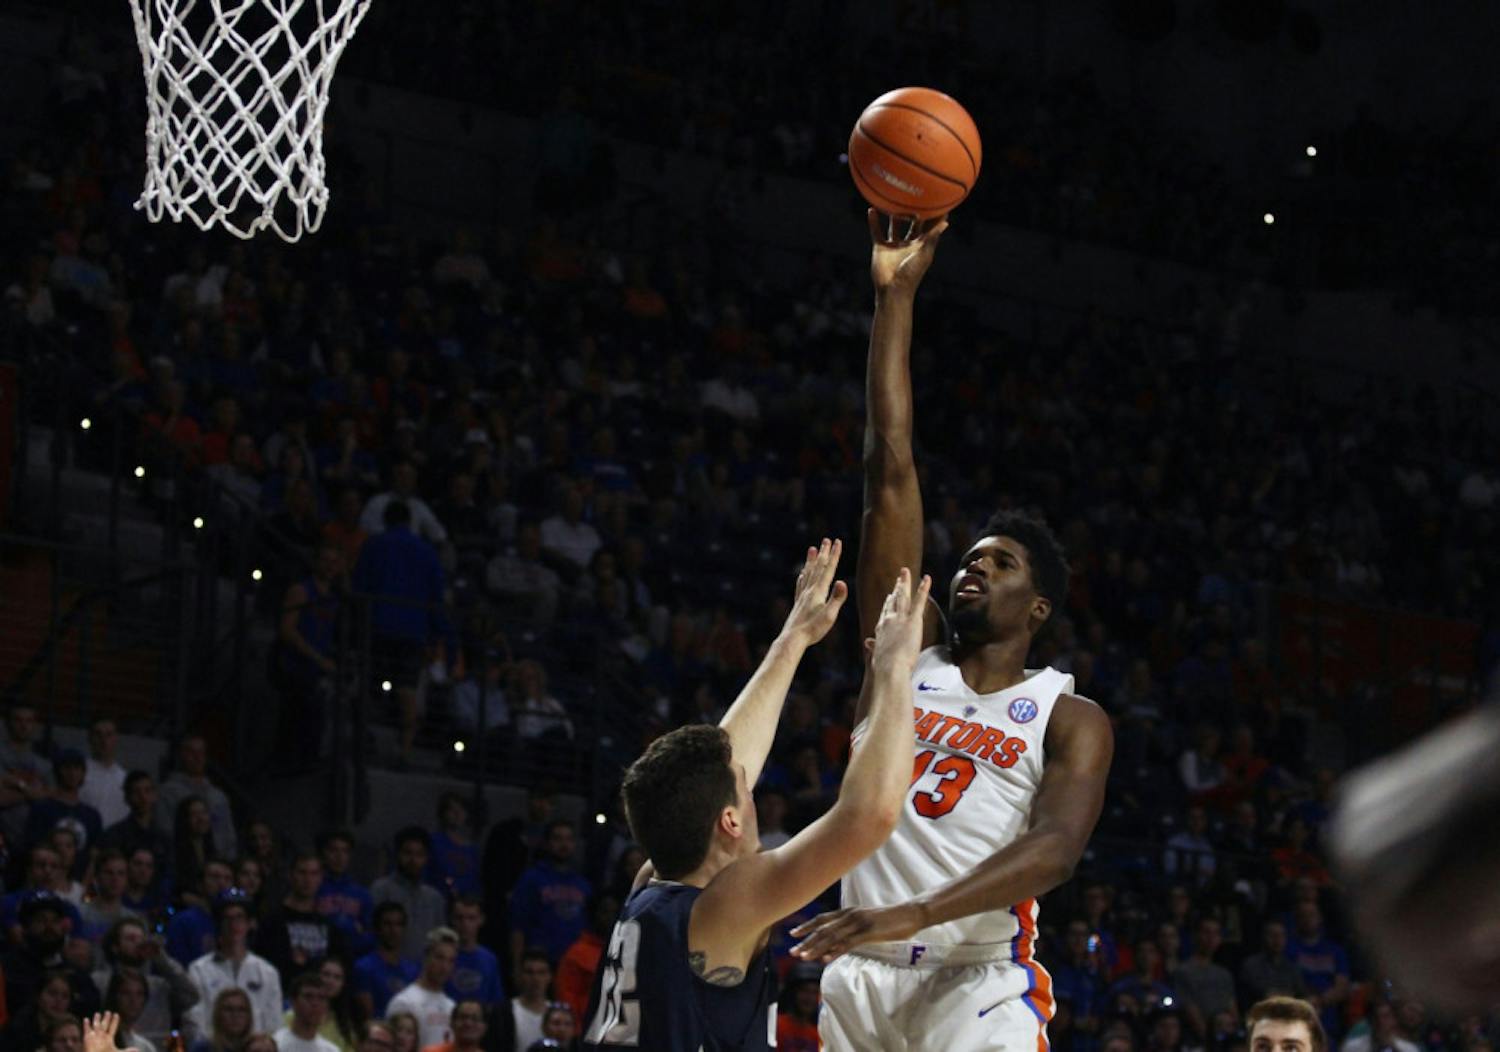 Florida coach Mike White said center Kevarrius Hayes is the only player devoting 100-percent effort to rebounding. “He’s been asked to go, it’s his job," White said, "Kevarrius Hayes - and he’s hard to block out because he goes 10 out of 10 times.”
&nbsp;
&nbsp;